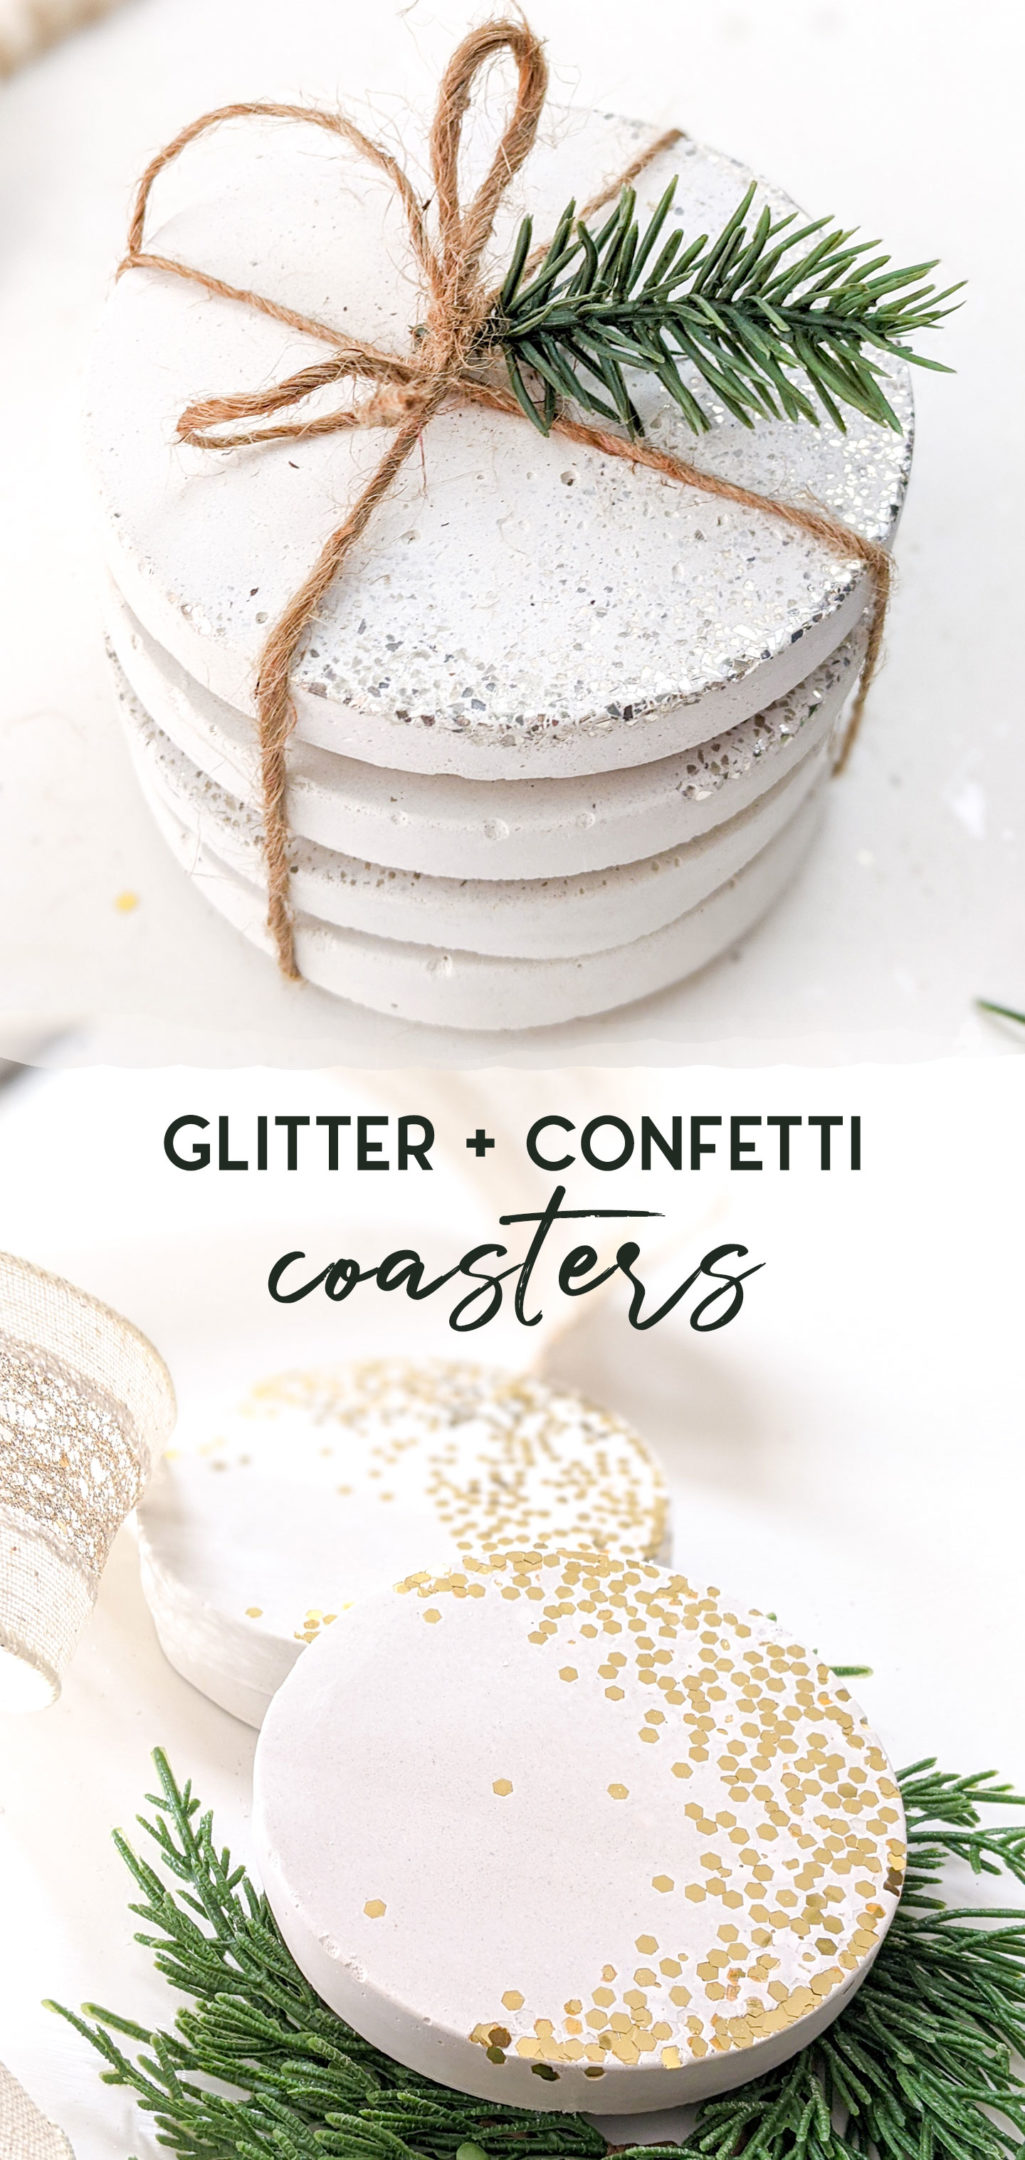 Glitter and confetti concrete coasters using white concrete and a silicone mode - 3 different beautiful options from just a few supplies! Makes an excellent hostess give or New Years Eve party decor. #hostessgift #partygift #NYE #newyears #christmas #coasters #concrete #whiteconcrete #diycoaster